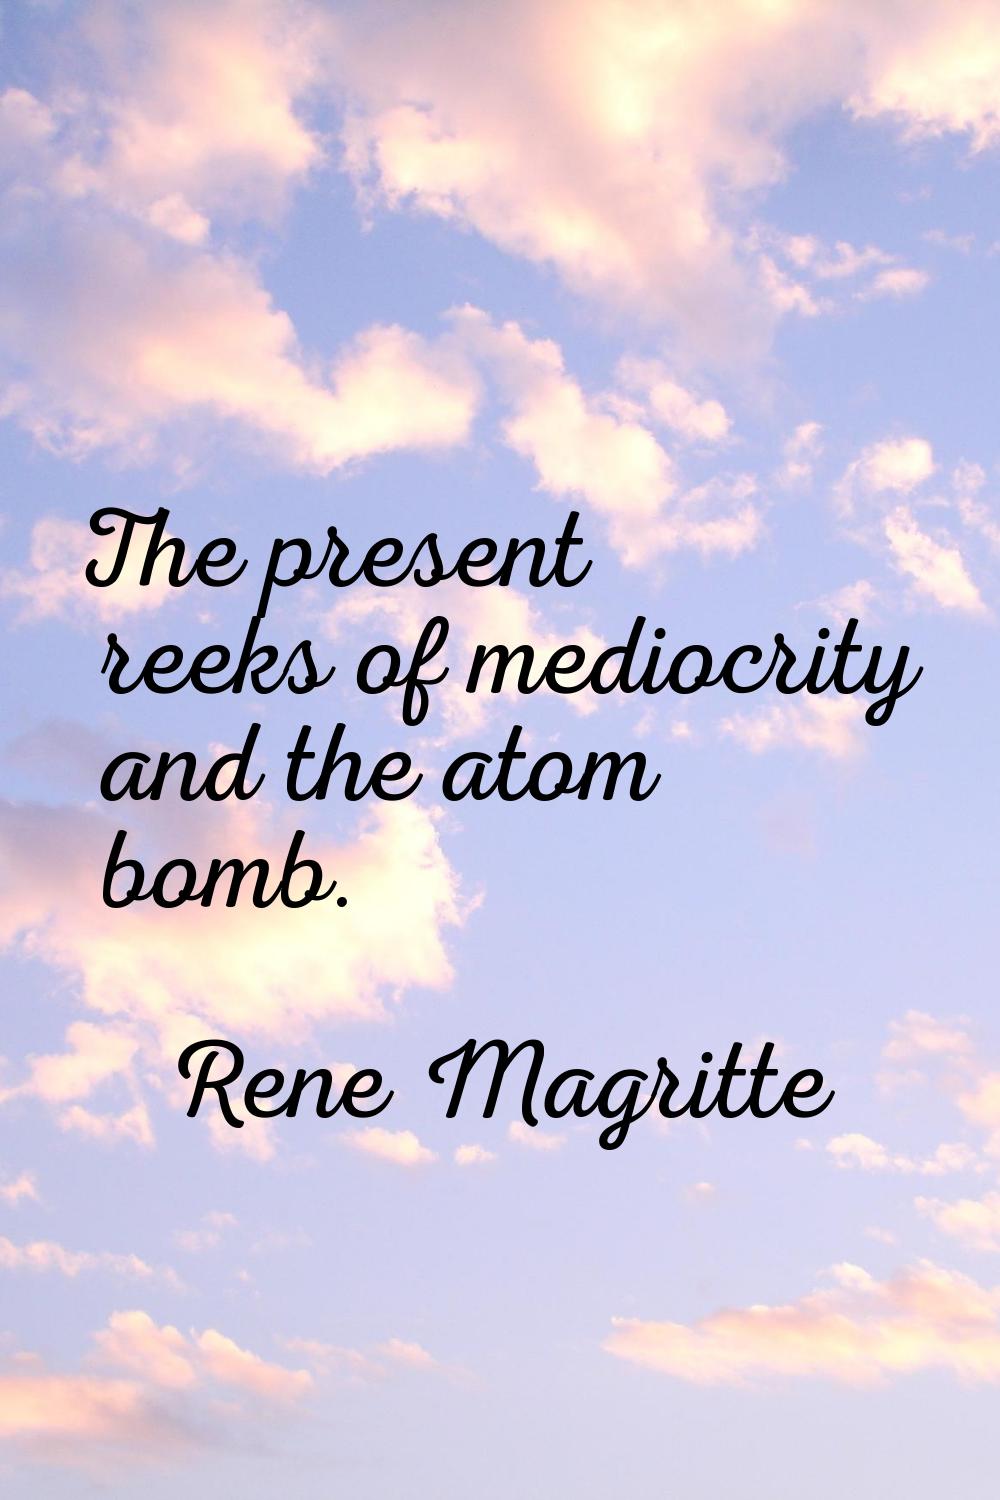 The present reeks of mediocrity and the atom bomb.